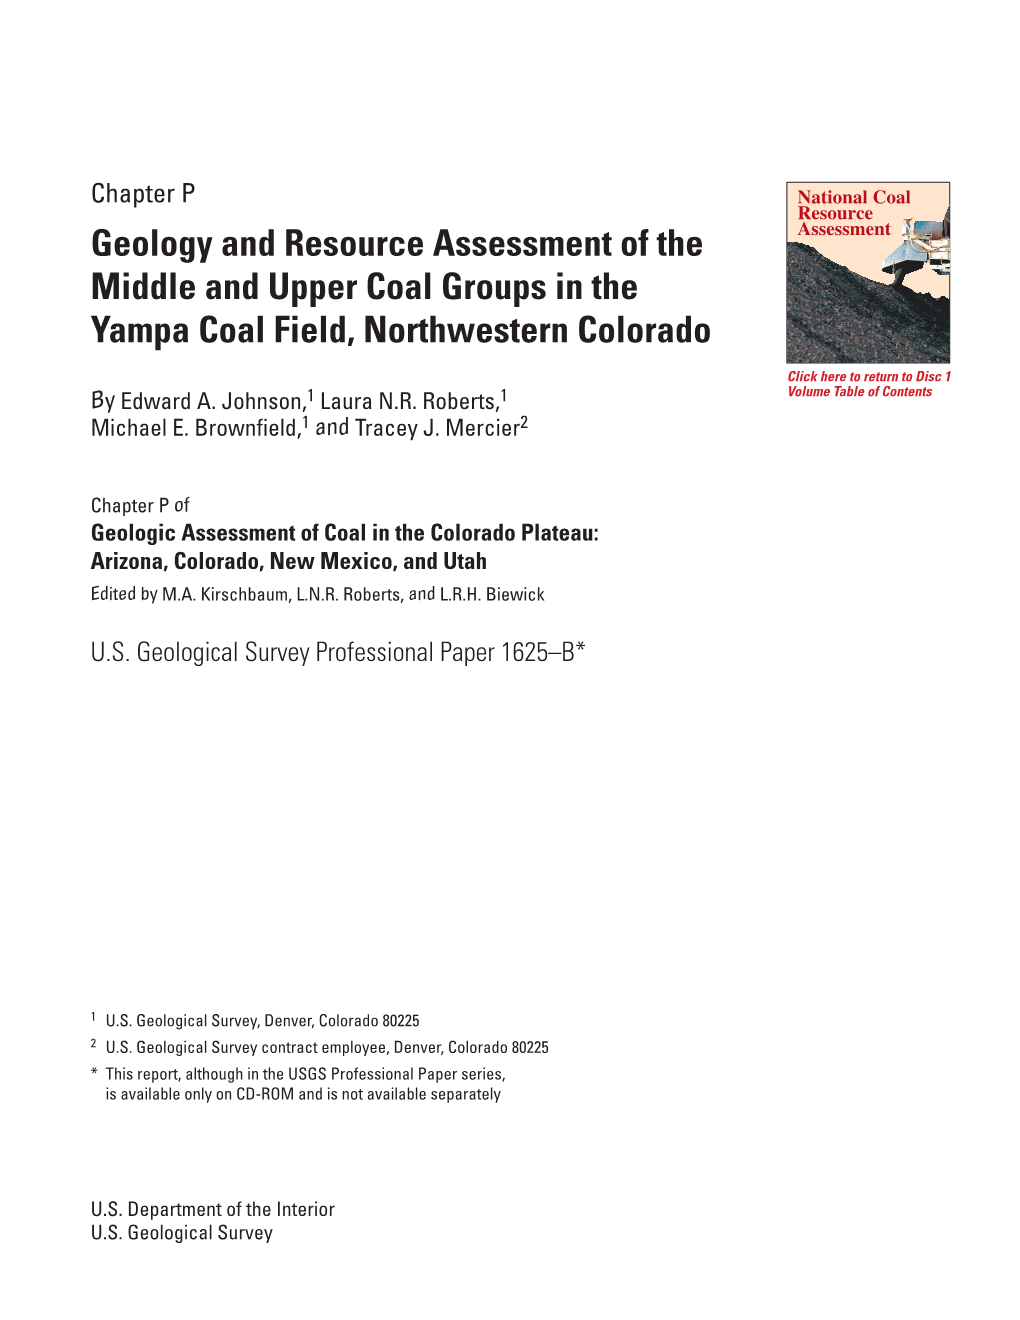 Chapter P—Geology and Resource Assessment of the Middle and Upper Coal Groups